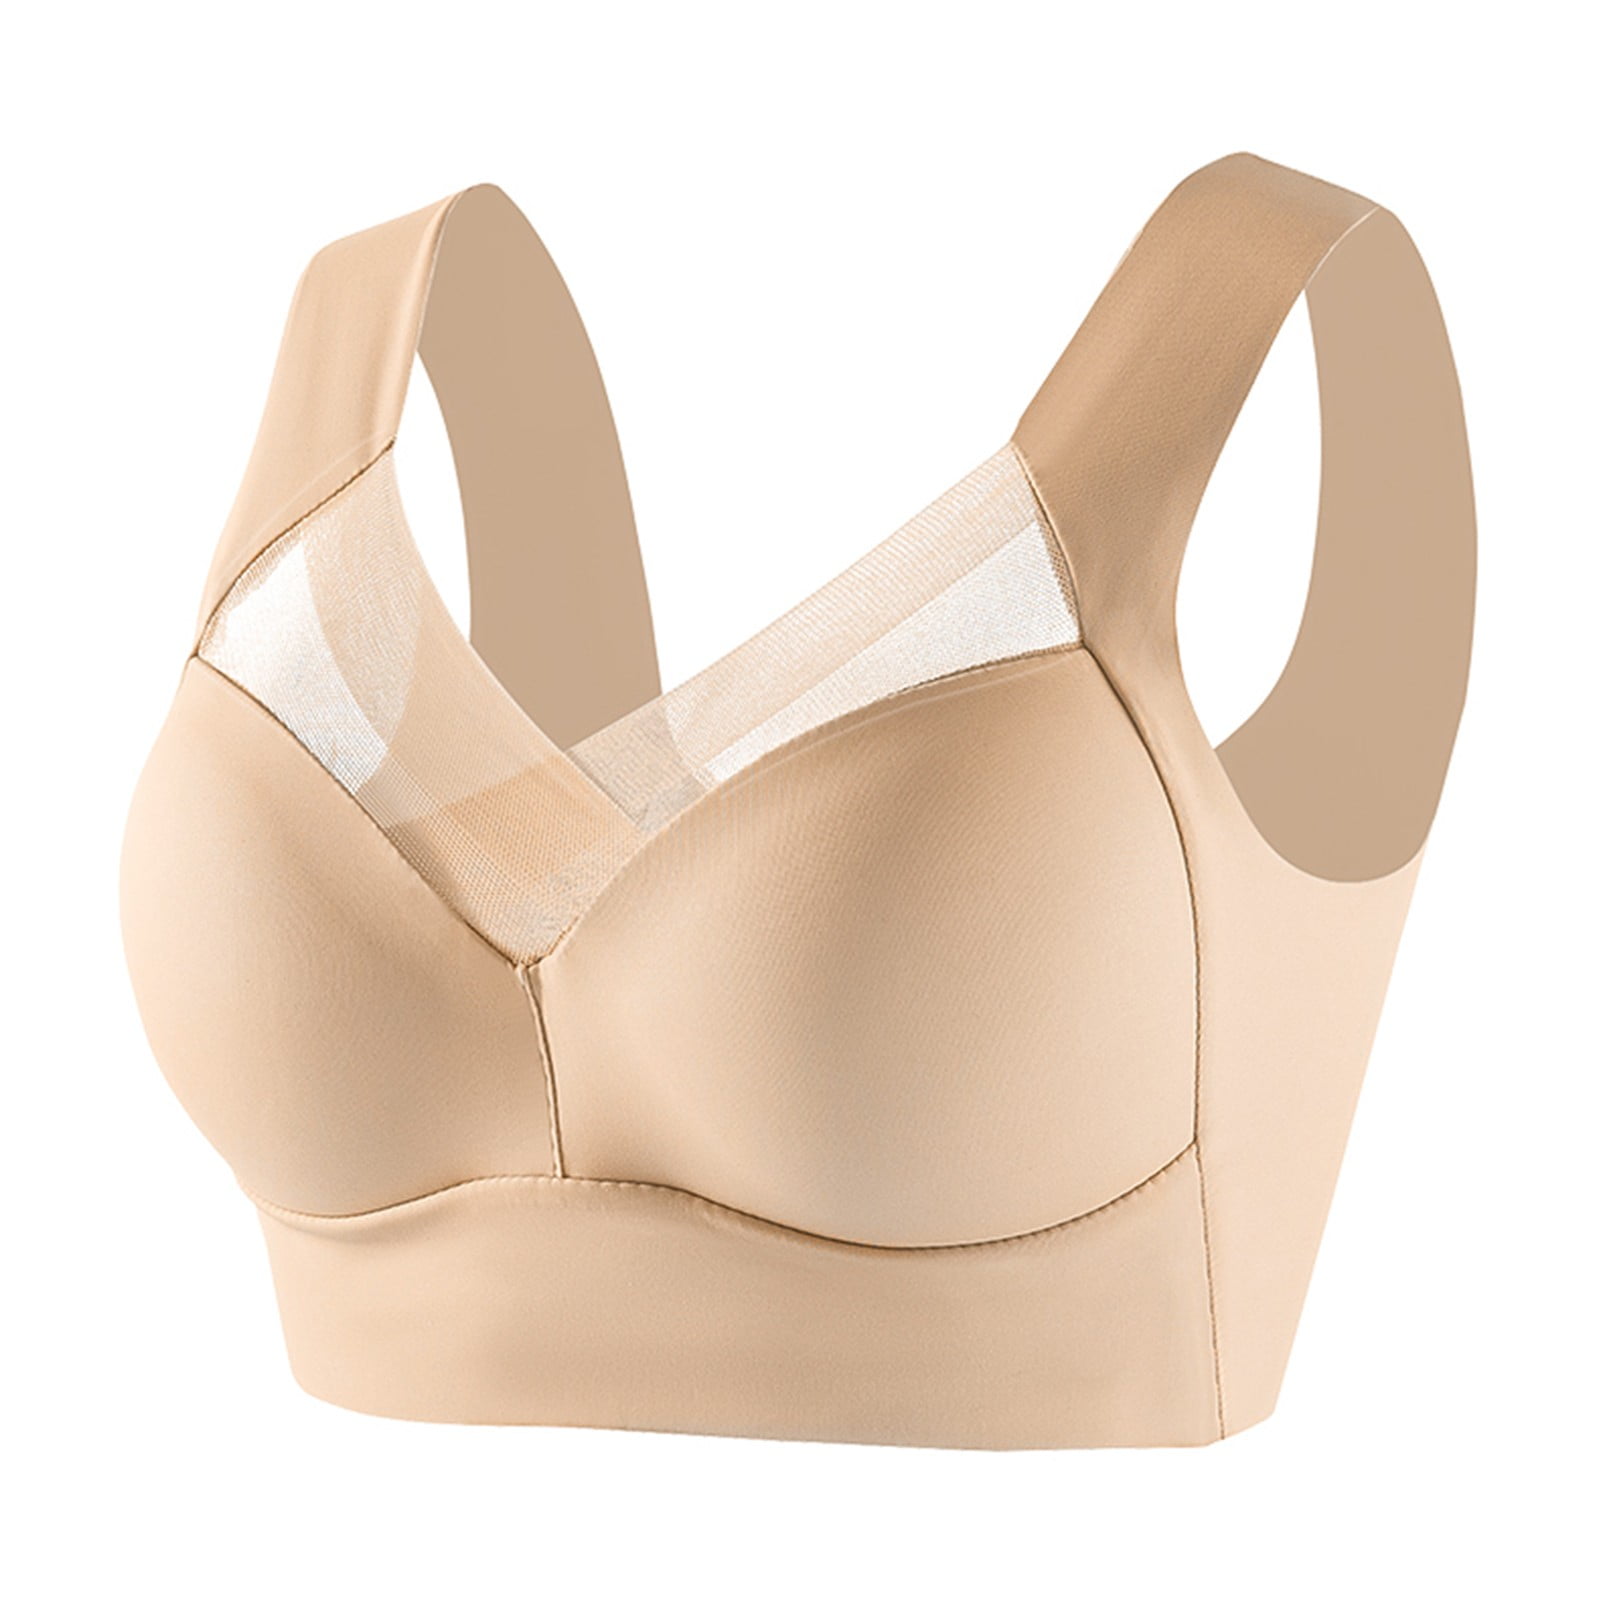 Buy Miss Beautiful Women's Cotton C Cup Bra Pack of 2 Wire Free